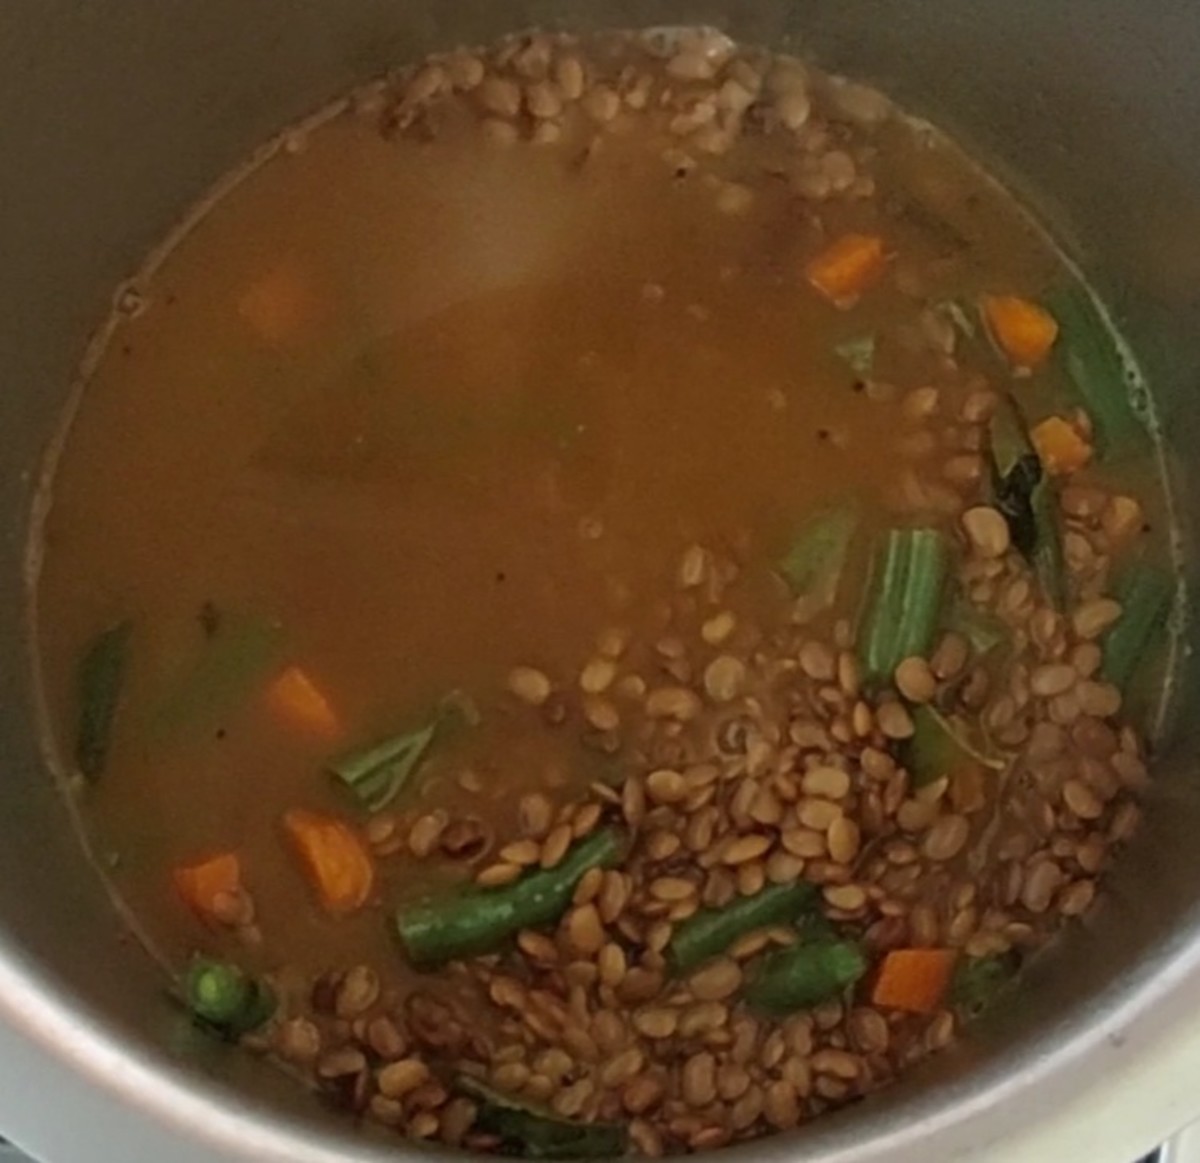 Once the vegetables are cooked, add the cooked horse gram to the vegetables.